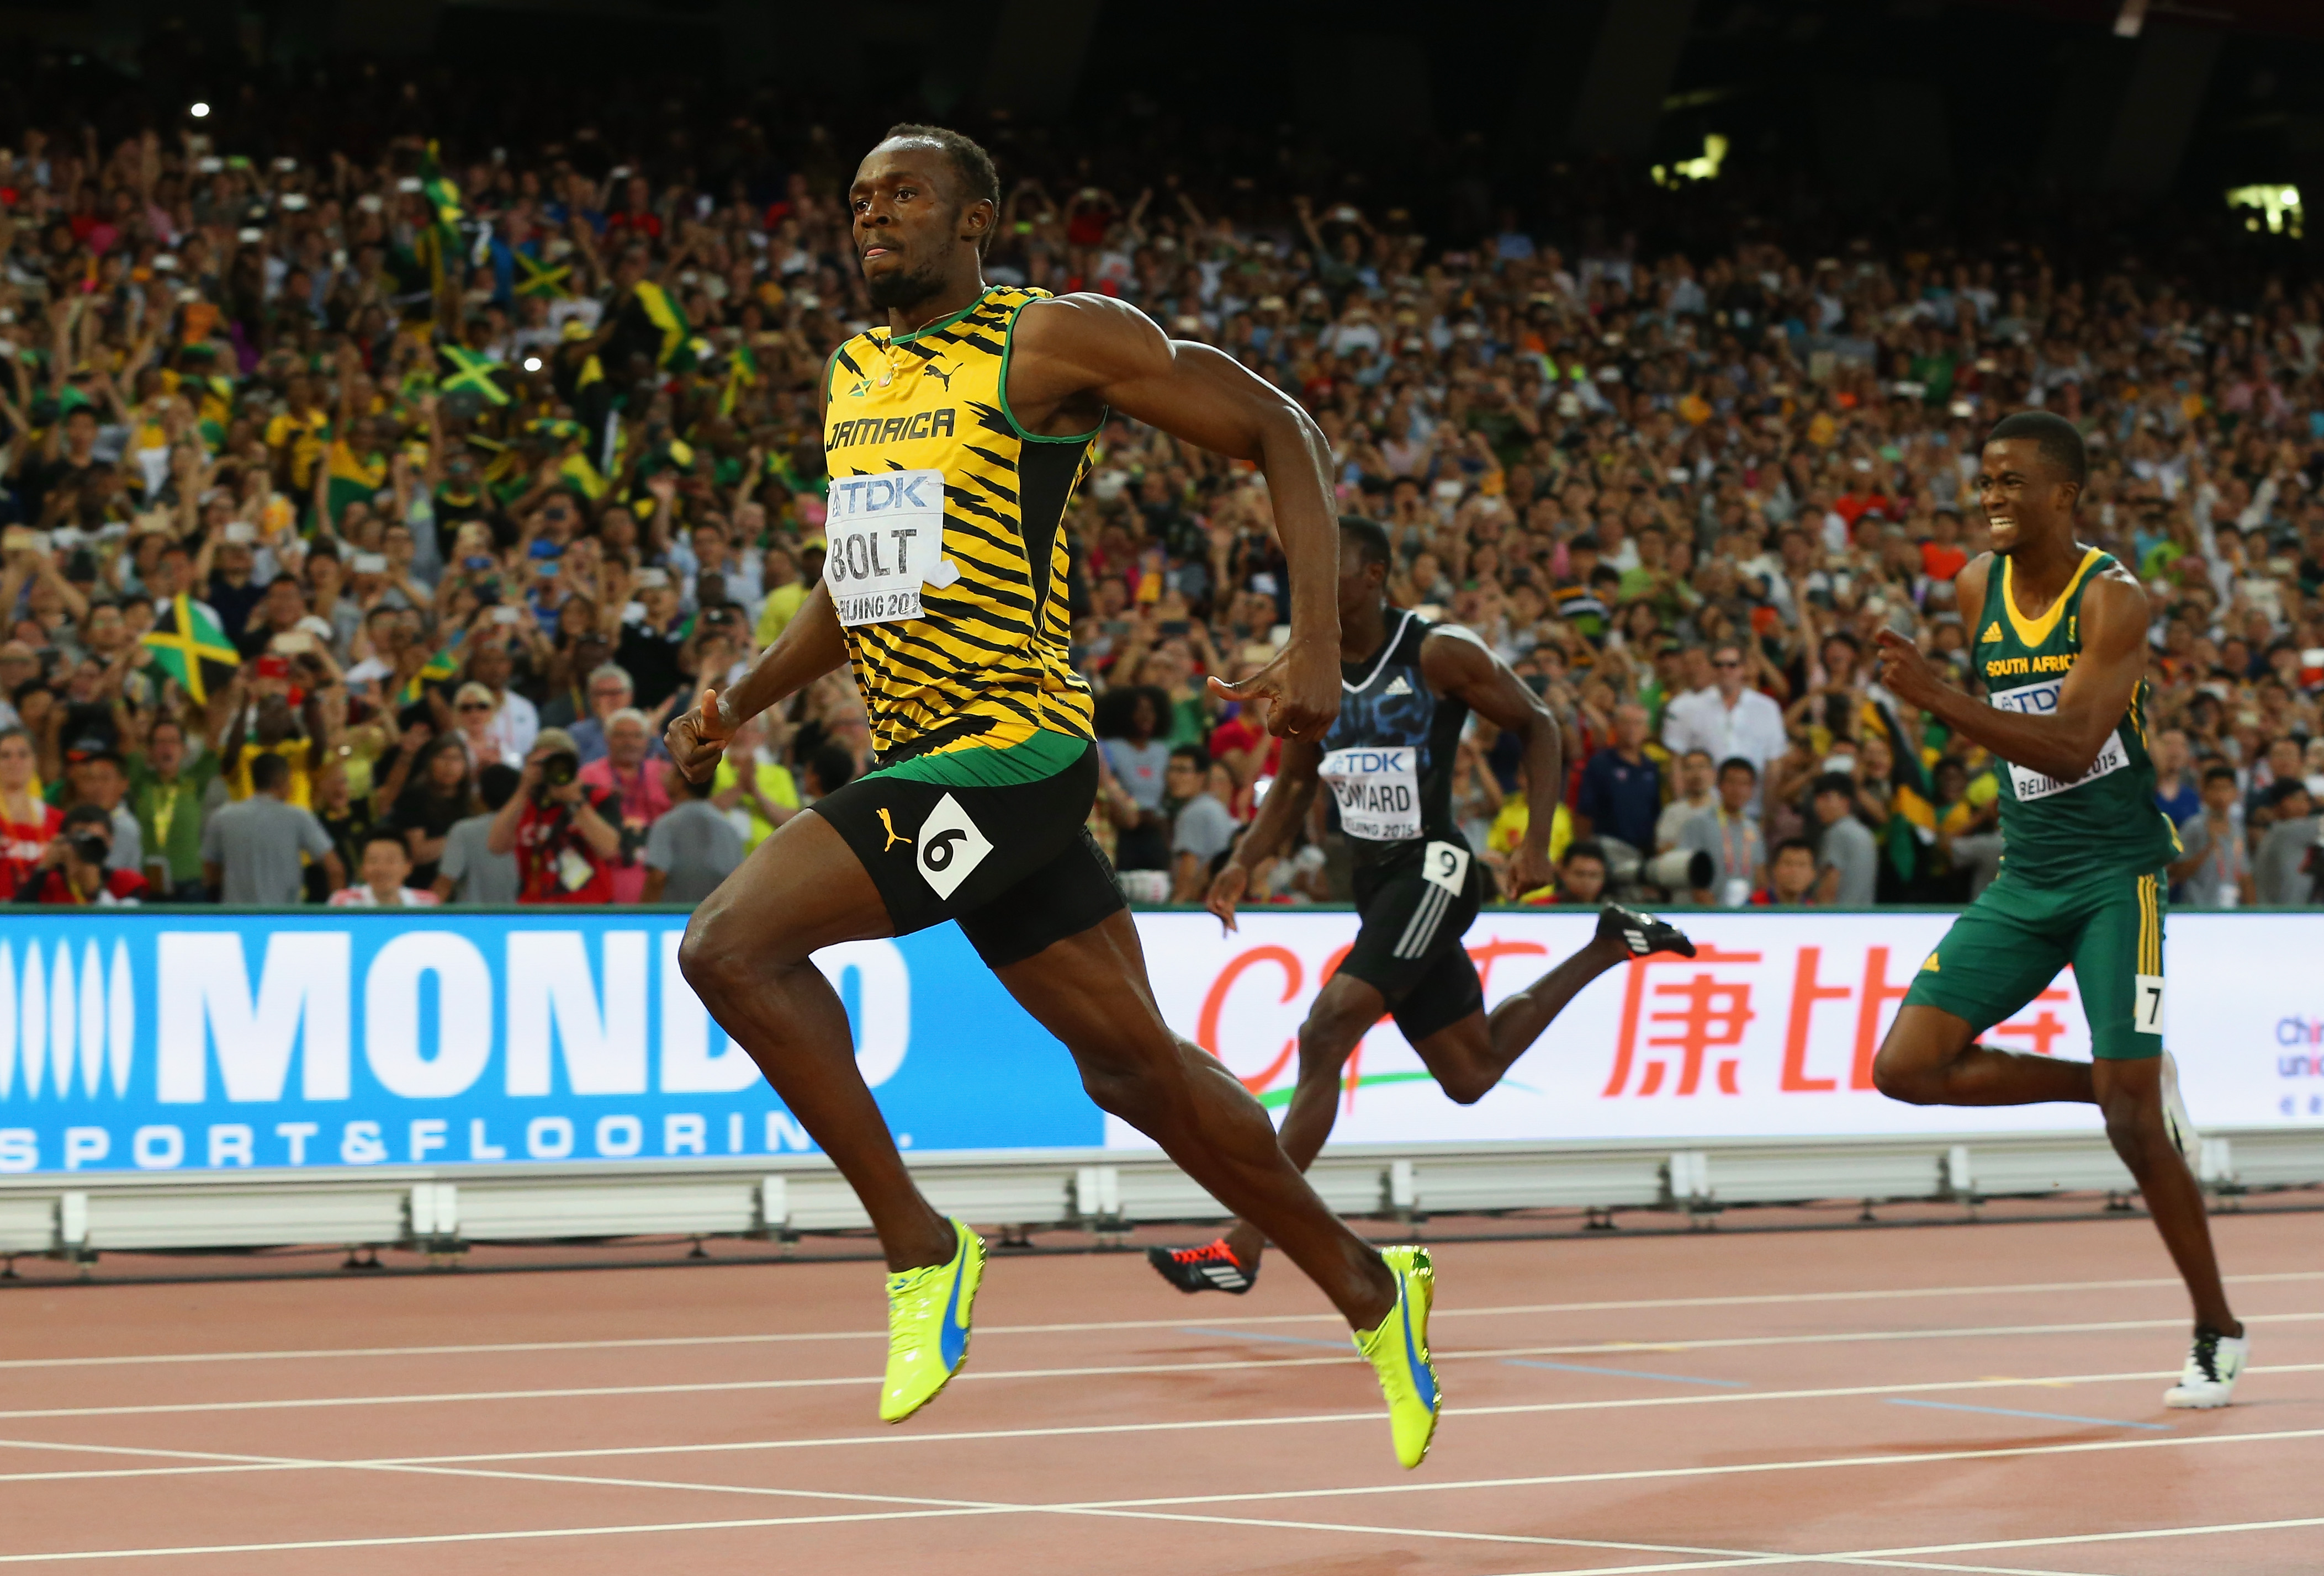 Usain Bolt may lose Olympic gold after teammate tests positive